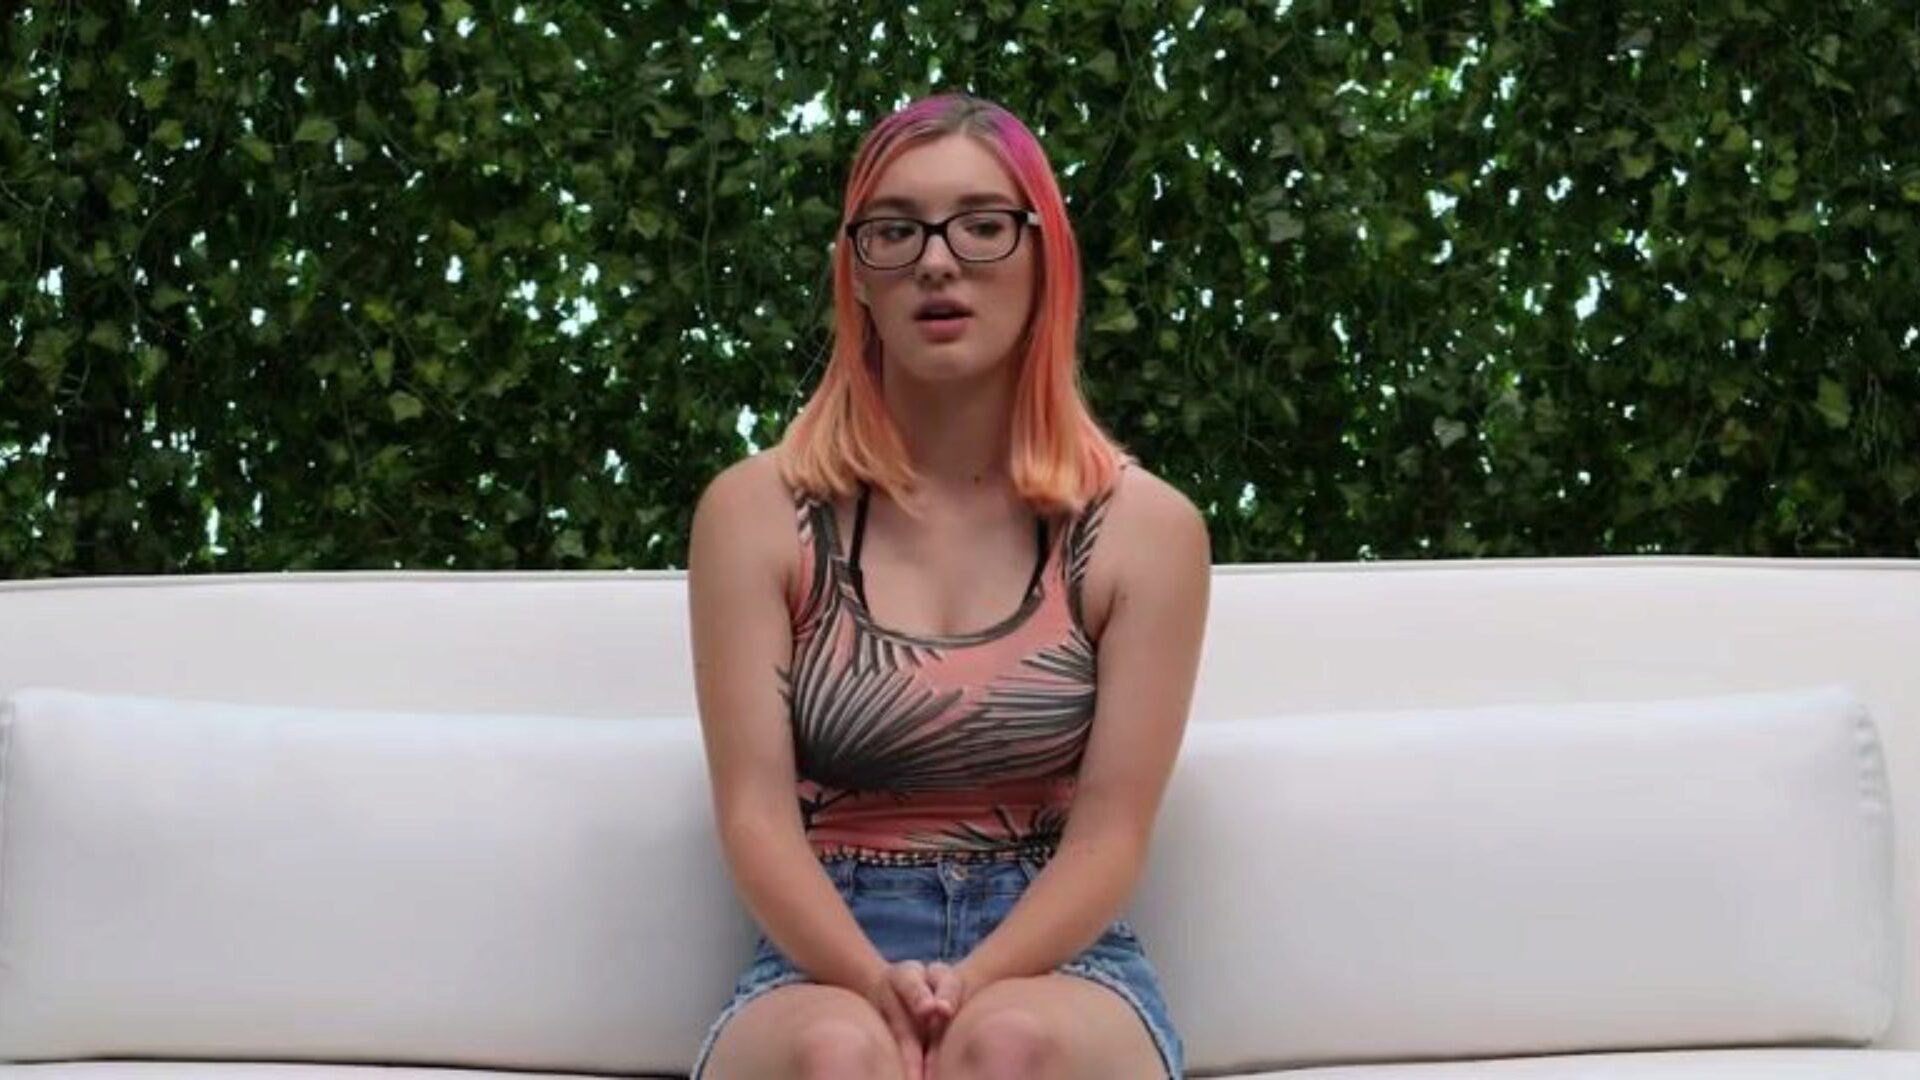 Nerdy Hotty with Rainbow Hair Casted POV U know a slut be a Total Geek when u watch her Nerd-Alert Glasses popped right on her face! Luckily that playgirl was not solely into sci-fi but schlong too